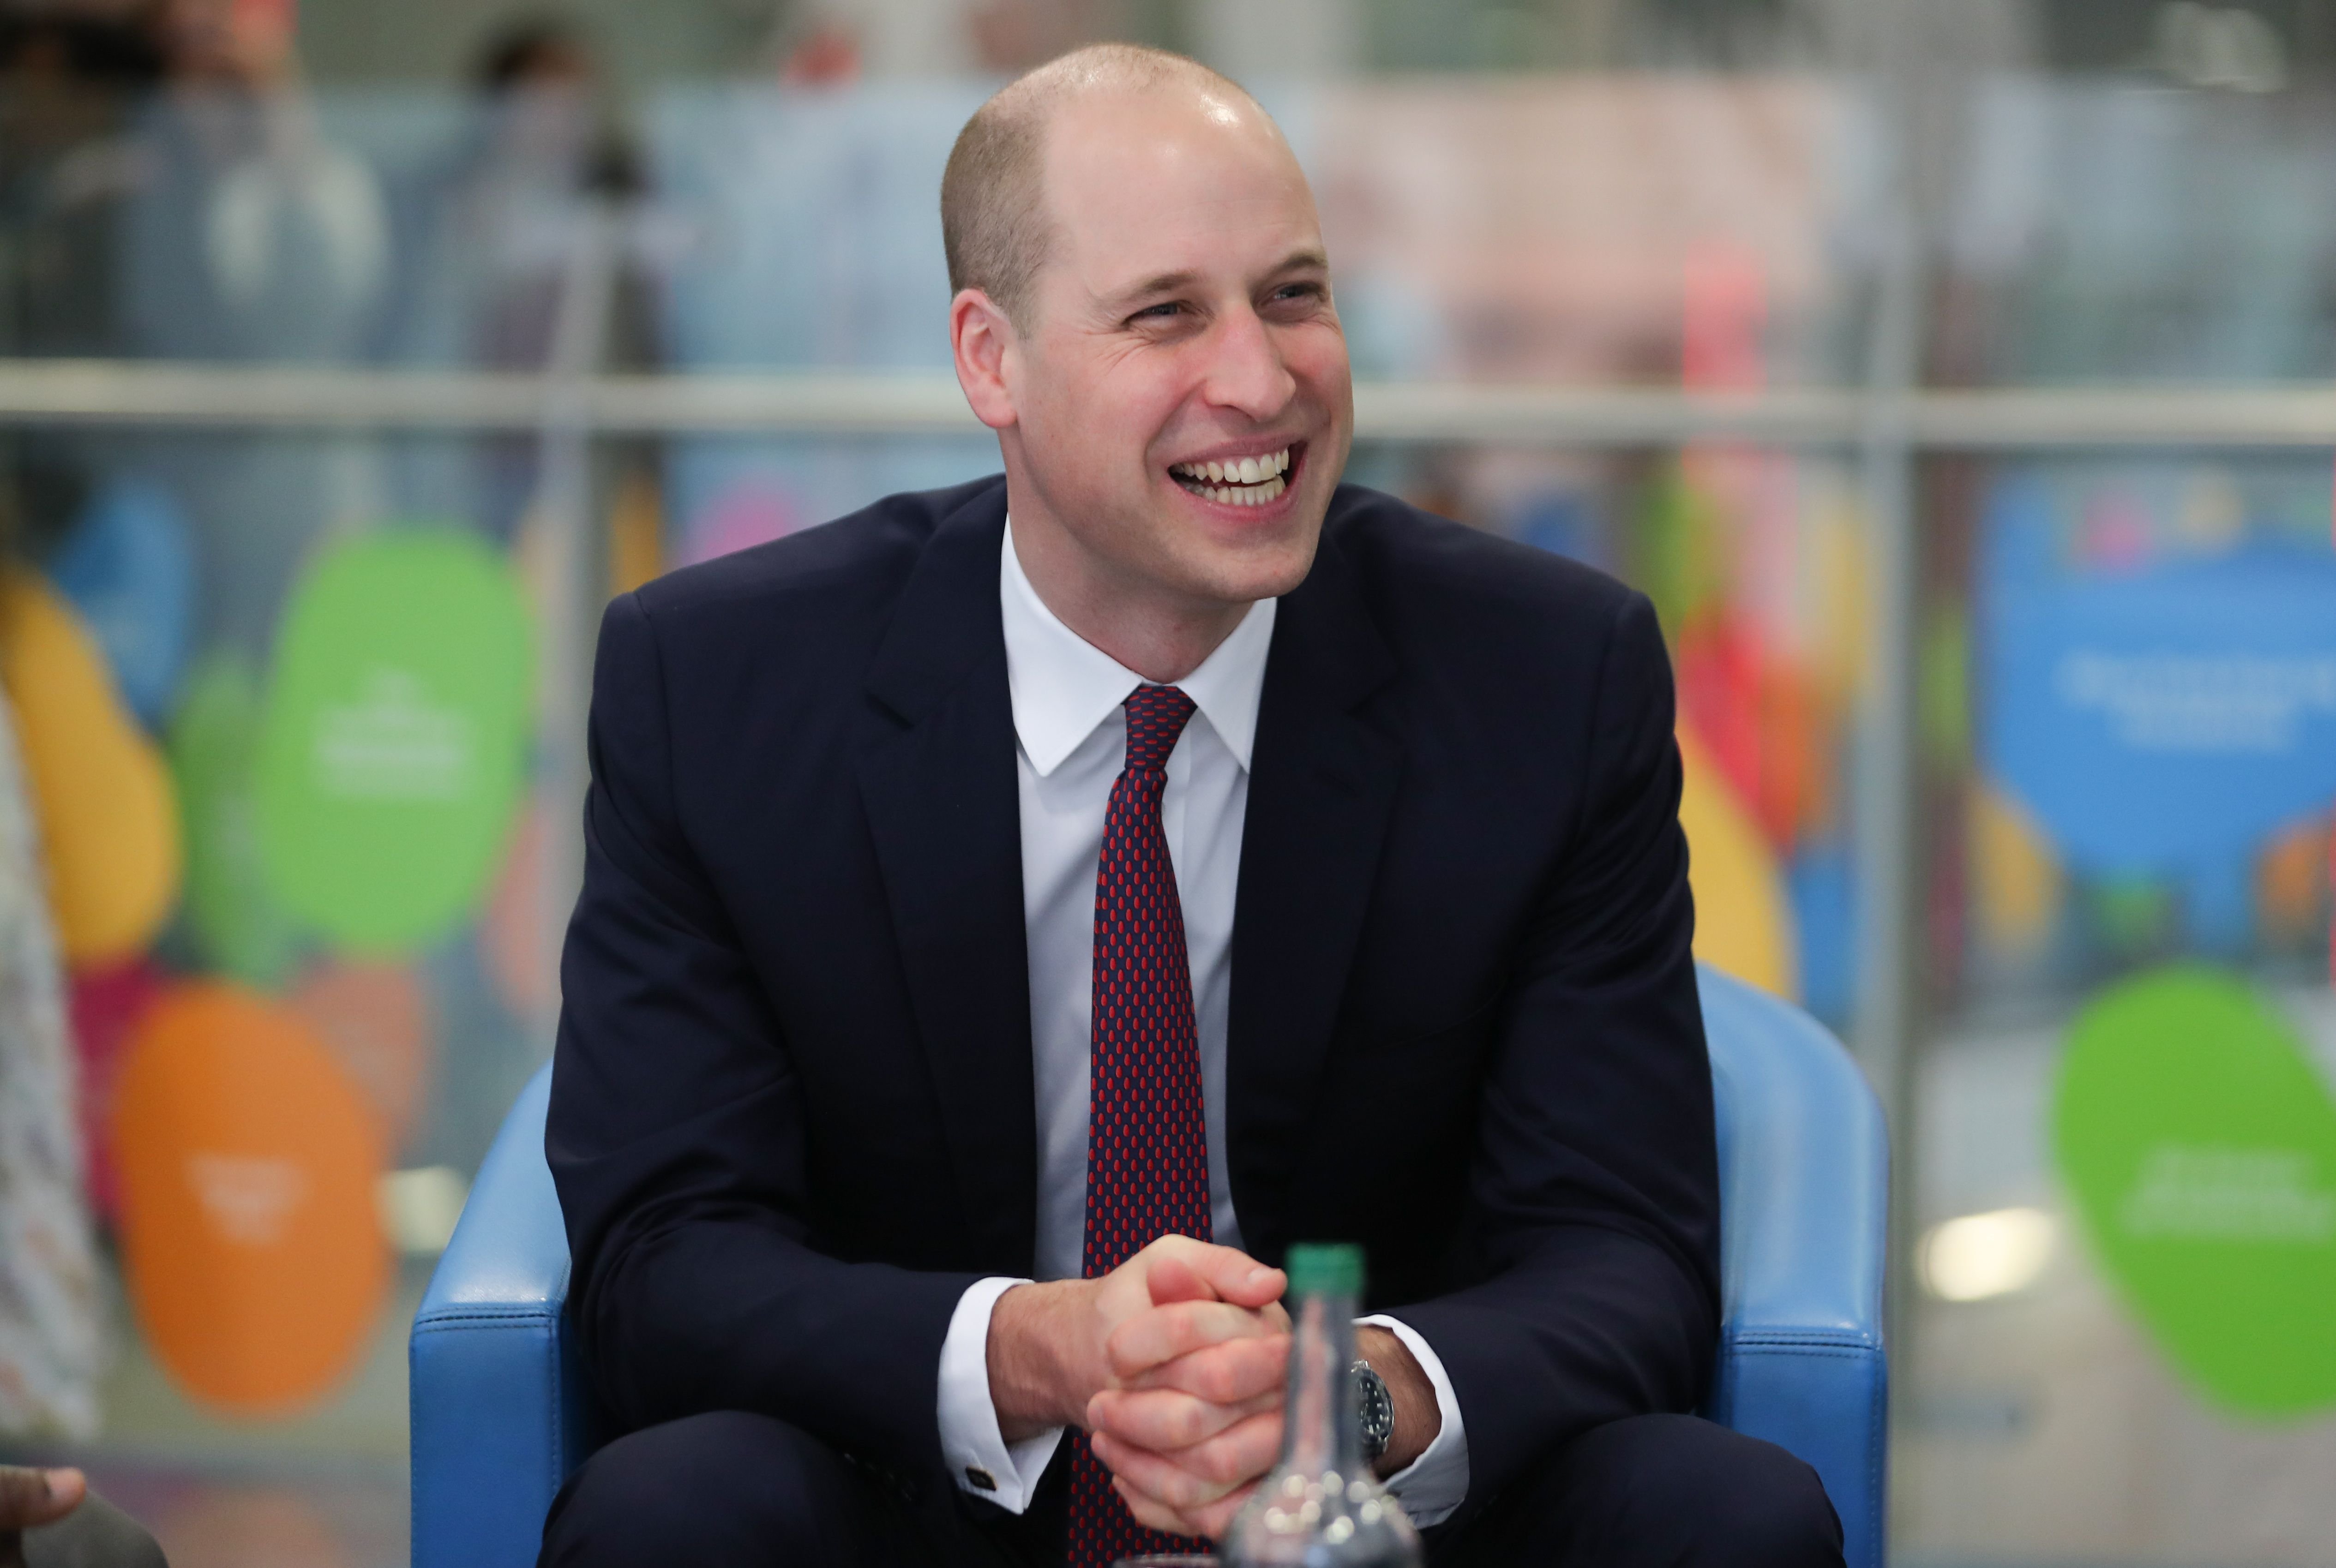 Prince William speaking with military veterans during a visit to Evelina London Children's Hospital in England | Photo: Daniel Leal-Olivas - WPA Pool/Getty Images